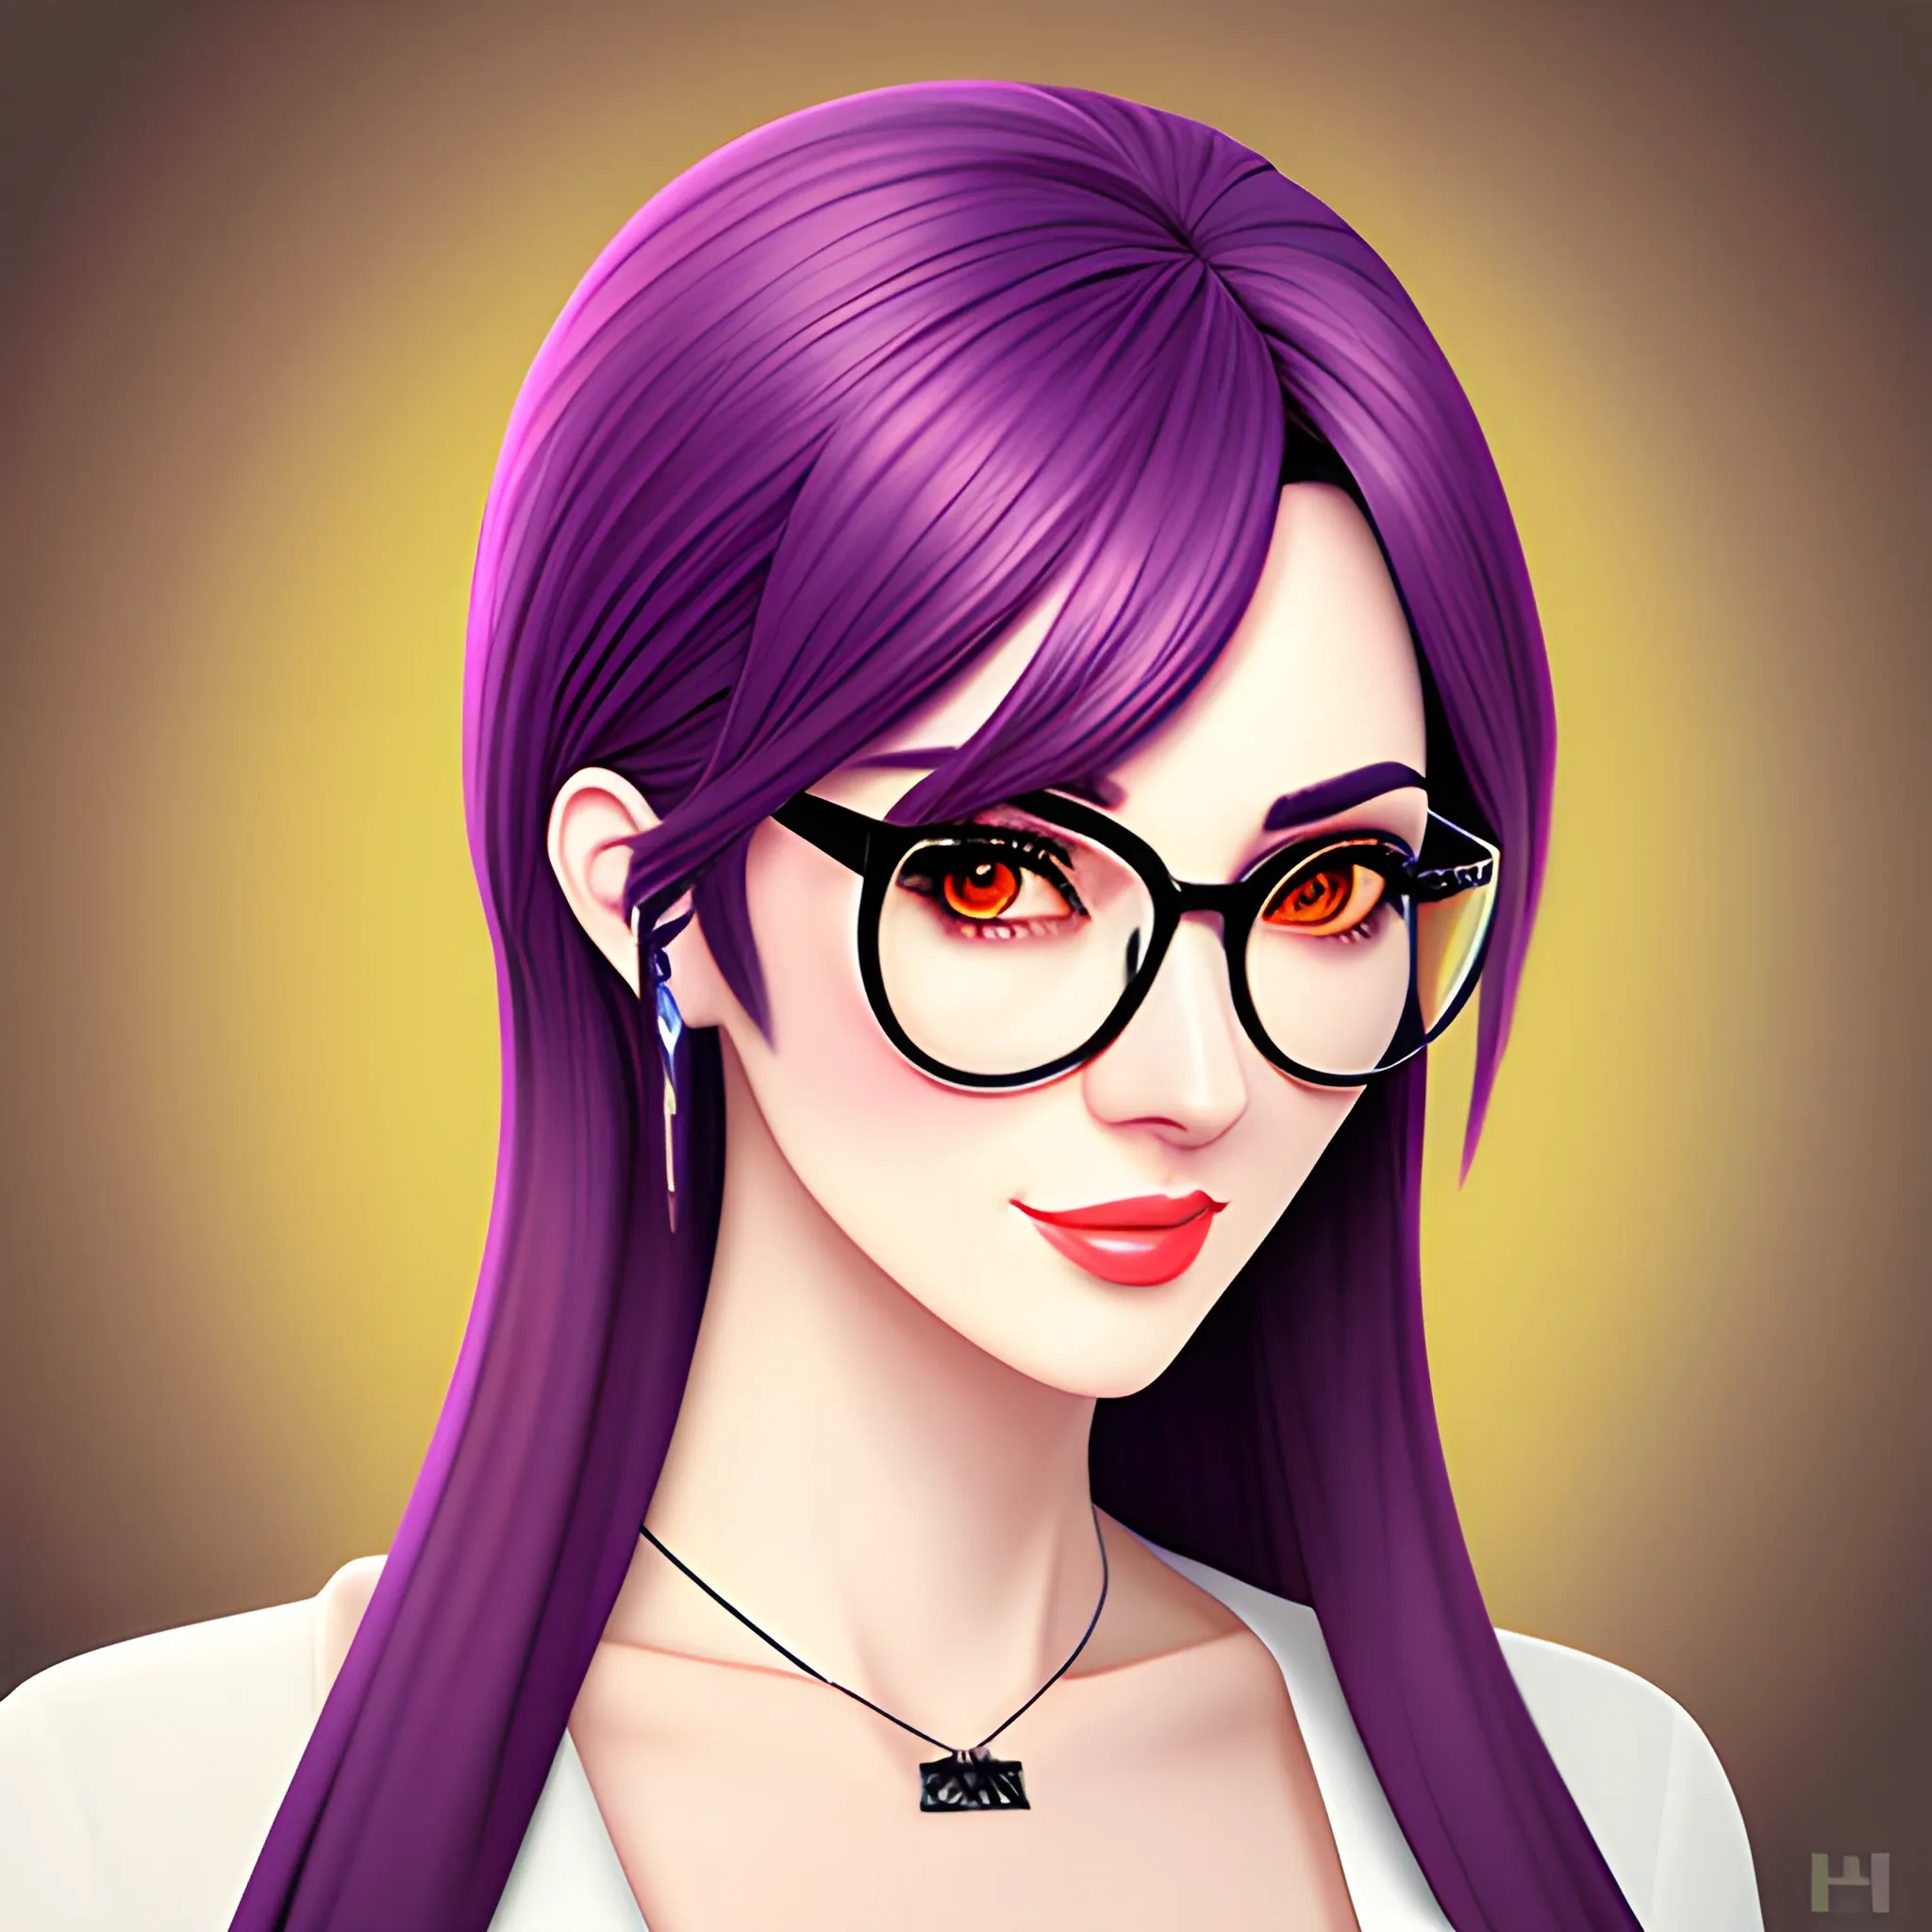 A young online freelancing girl, cute style, colorful anime decoration, hyper-realistic portrait style with eye glasses with no facial hair, high resolution 